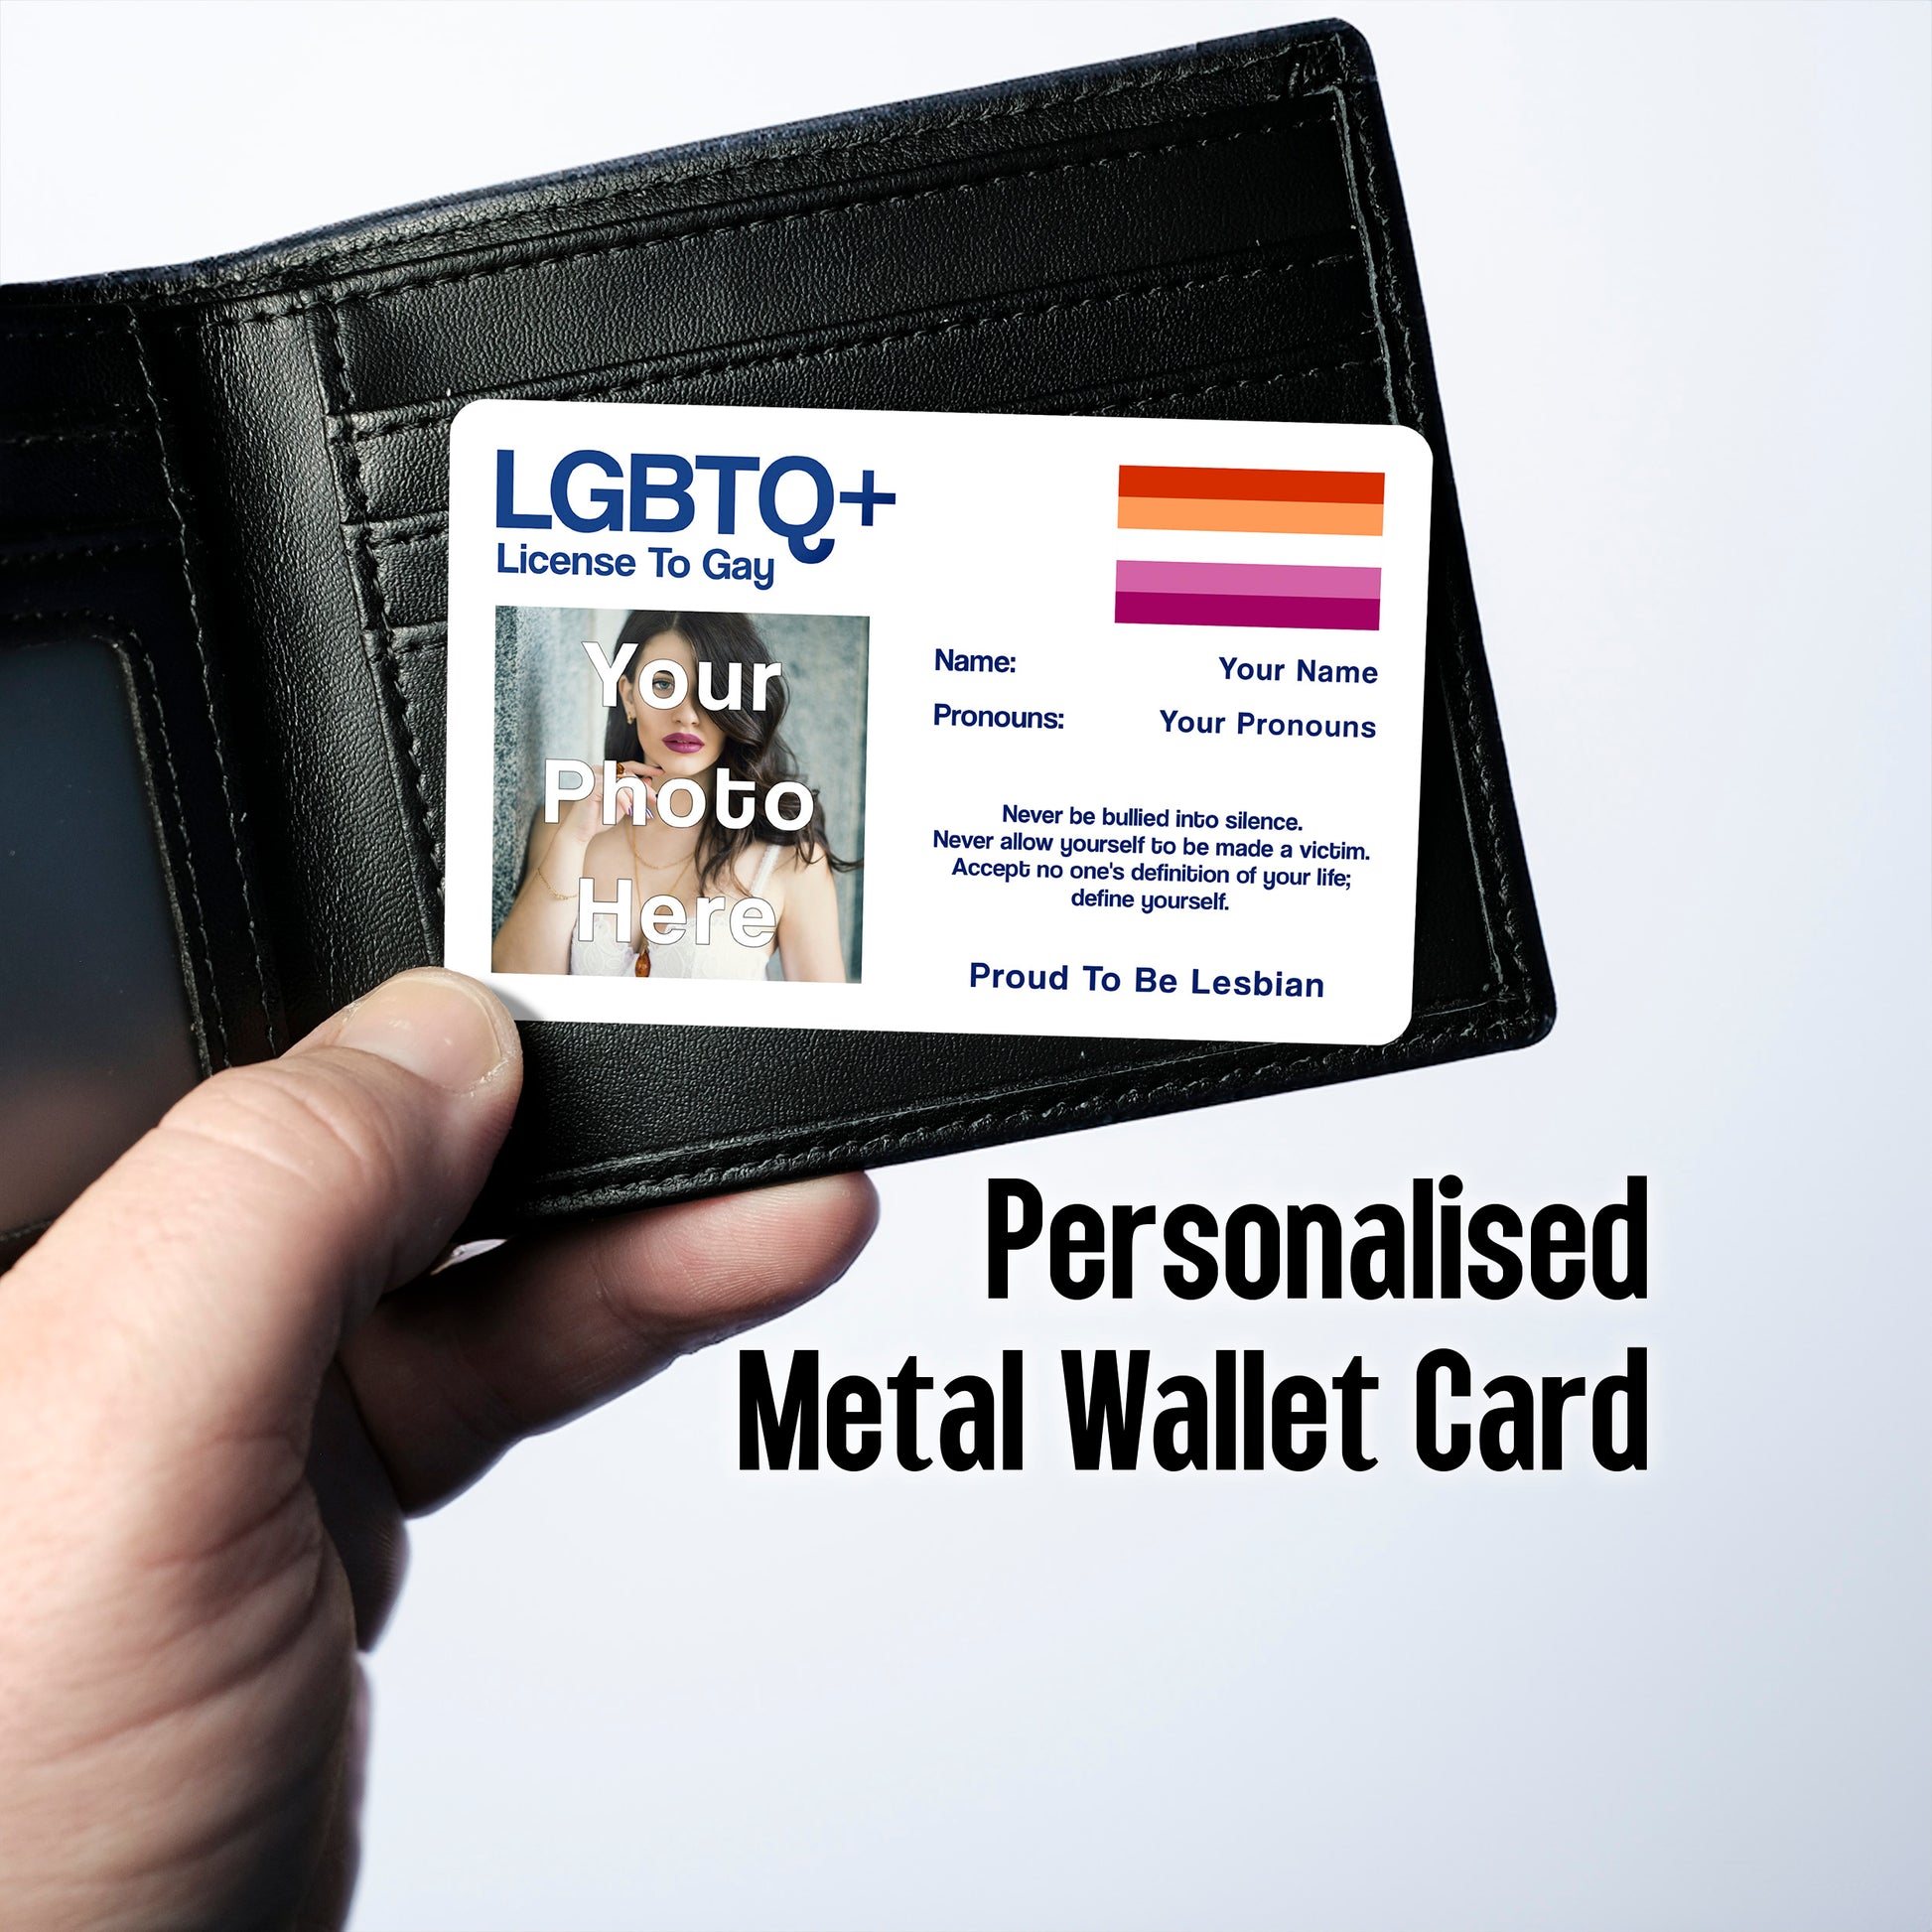 Lesbian License To Gay aluminium wallet card personalised with your name, pronouns, and photo